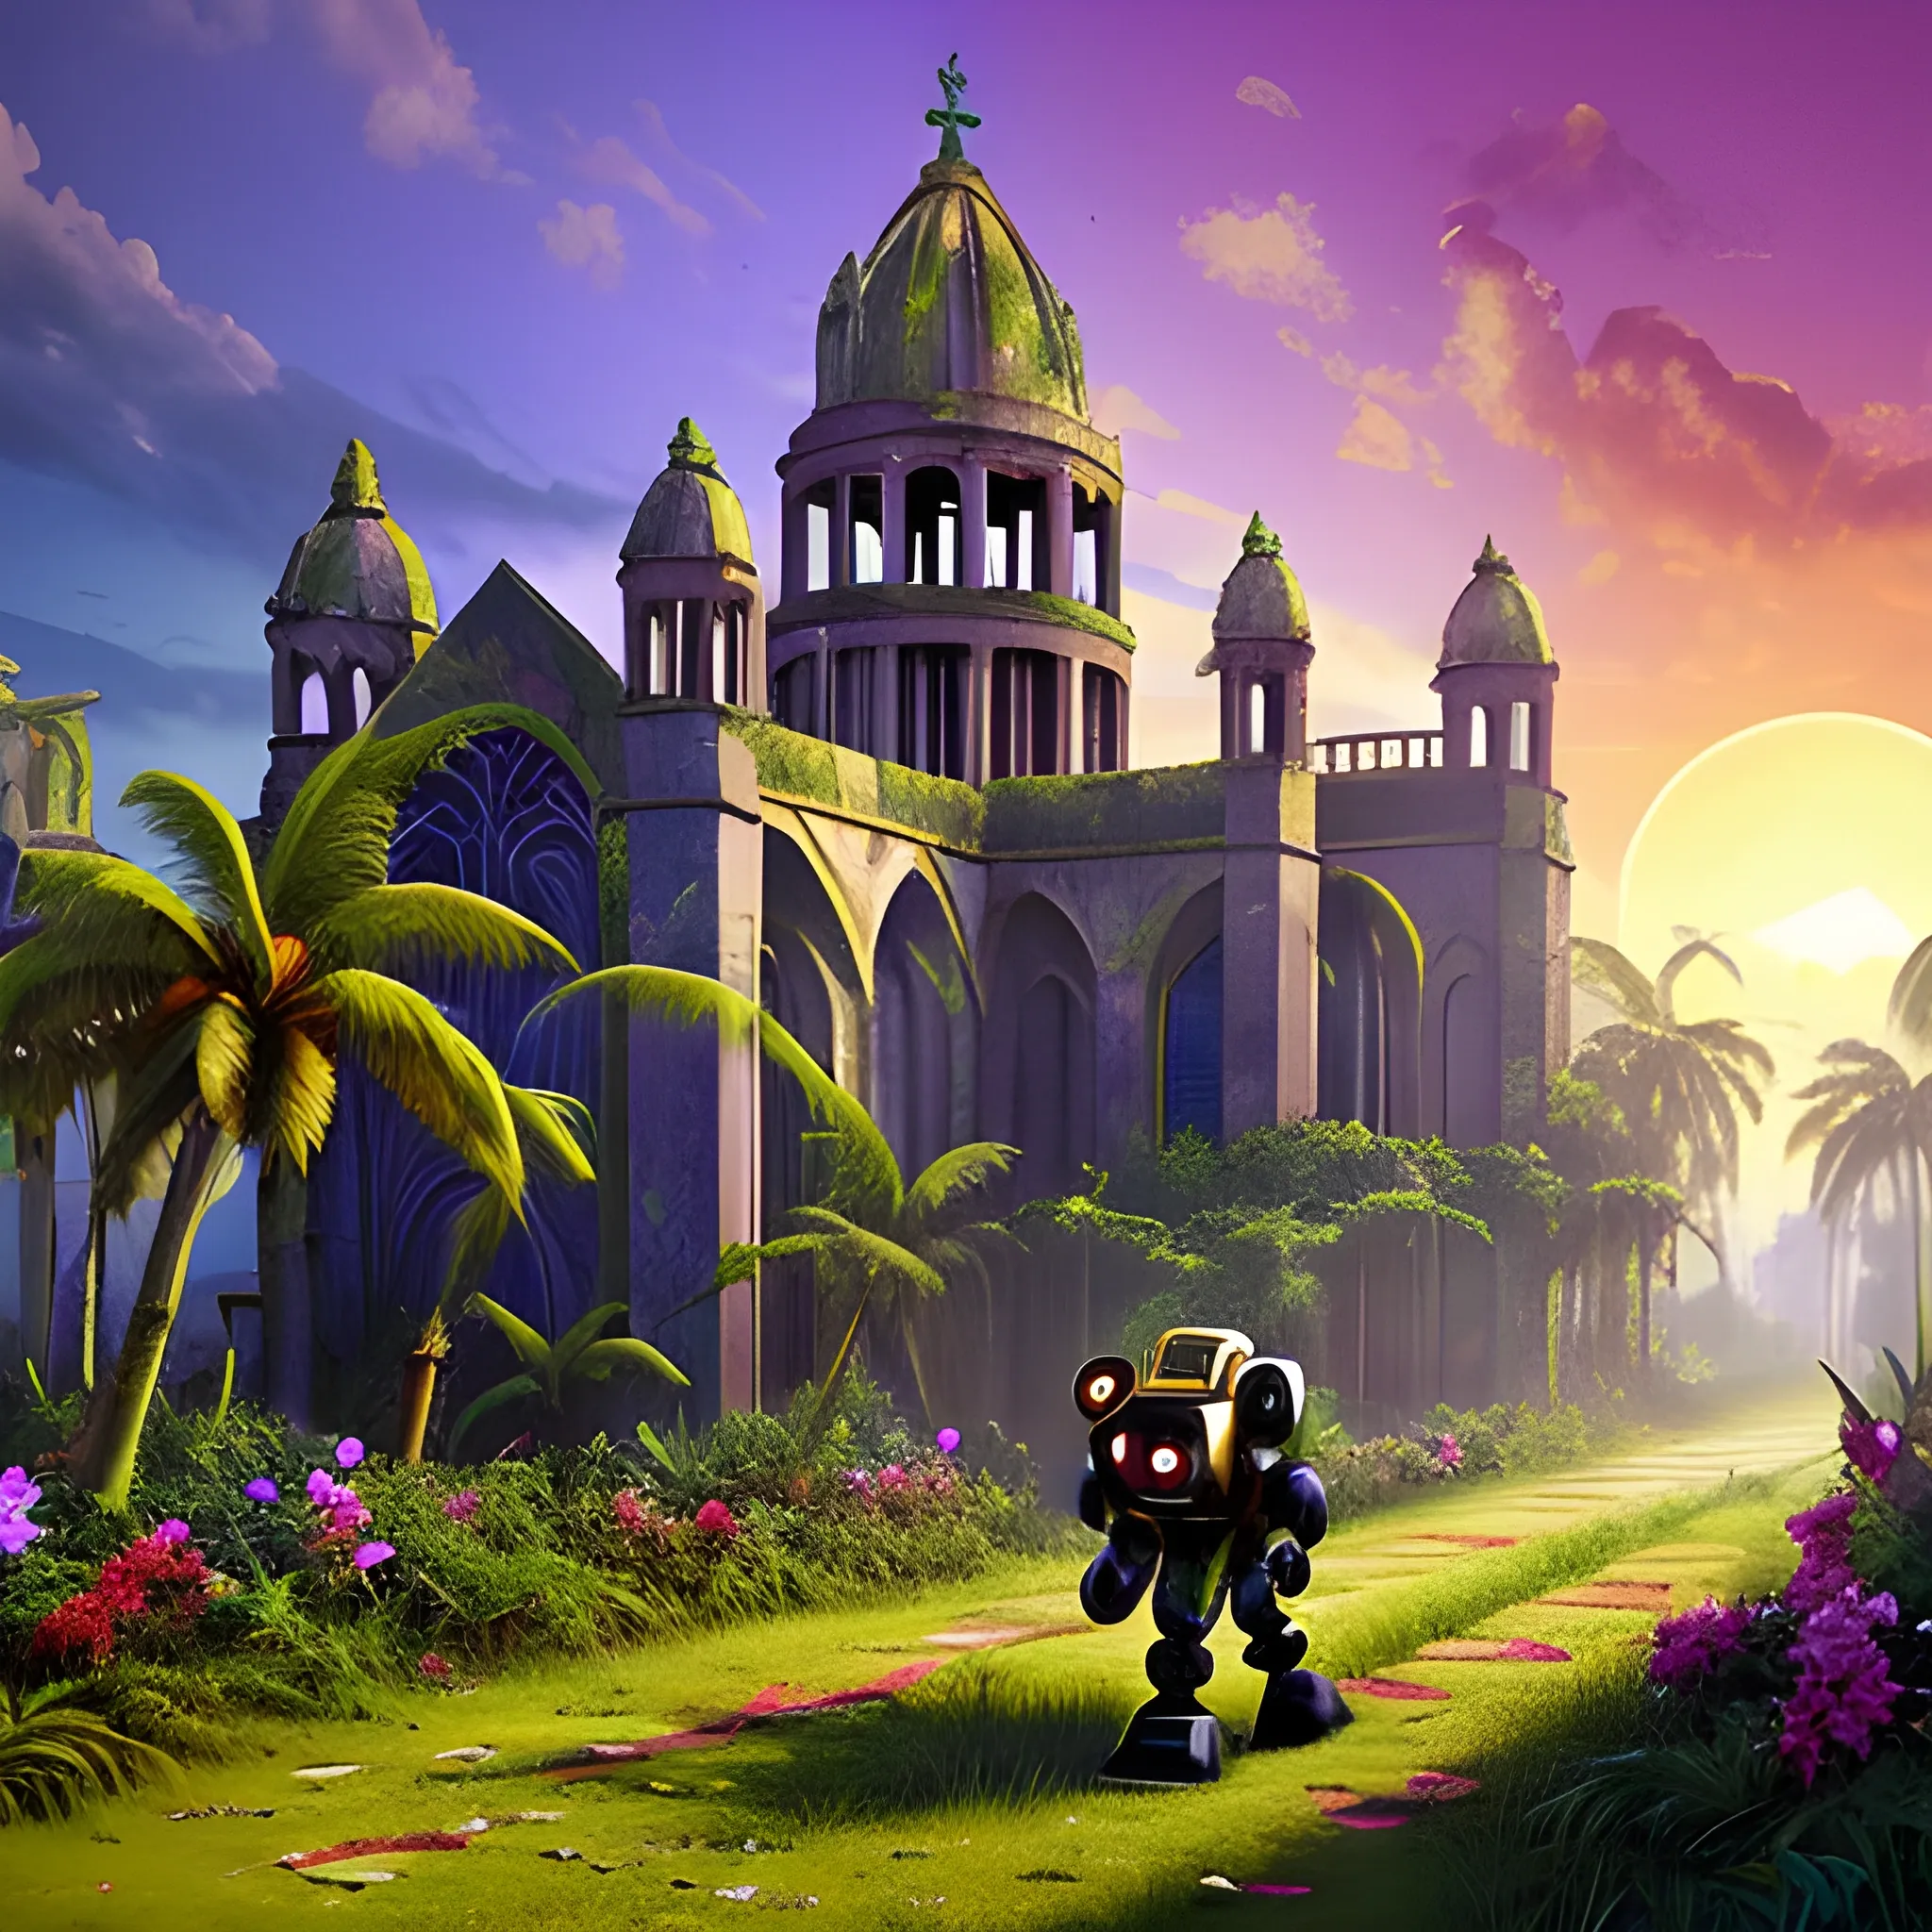 abandoned ruined city invaded by lush vegetation, very colorful flowers, a ruined cathedral under tropical vegetation, a very sophisticated robot walking towards the horizon of a setting sun